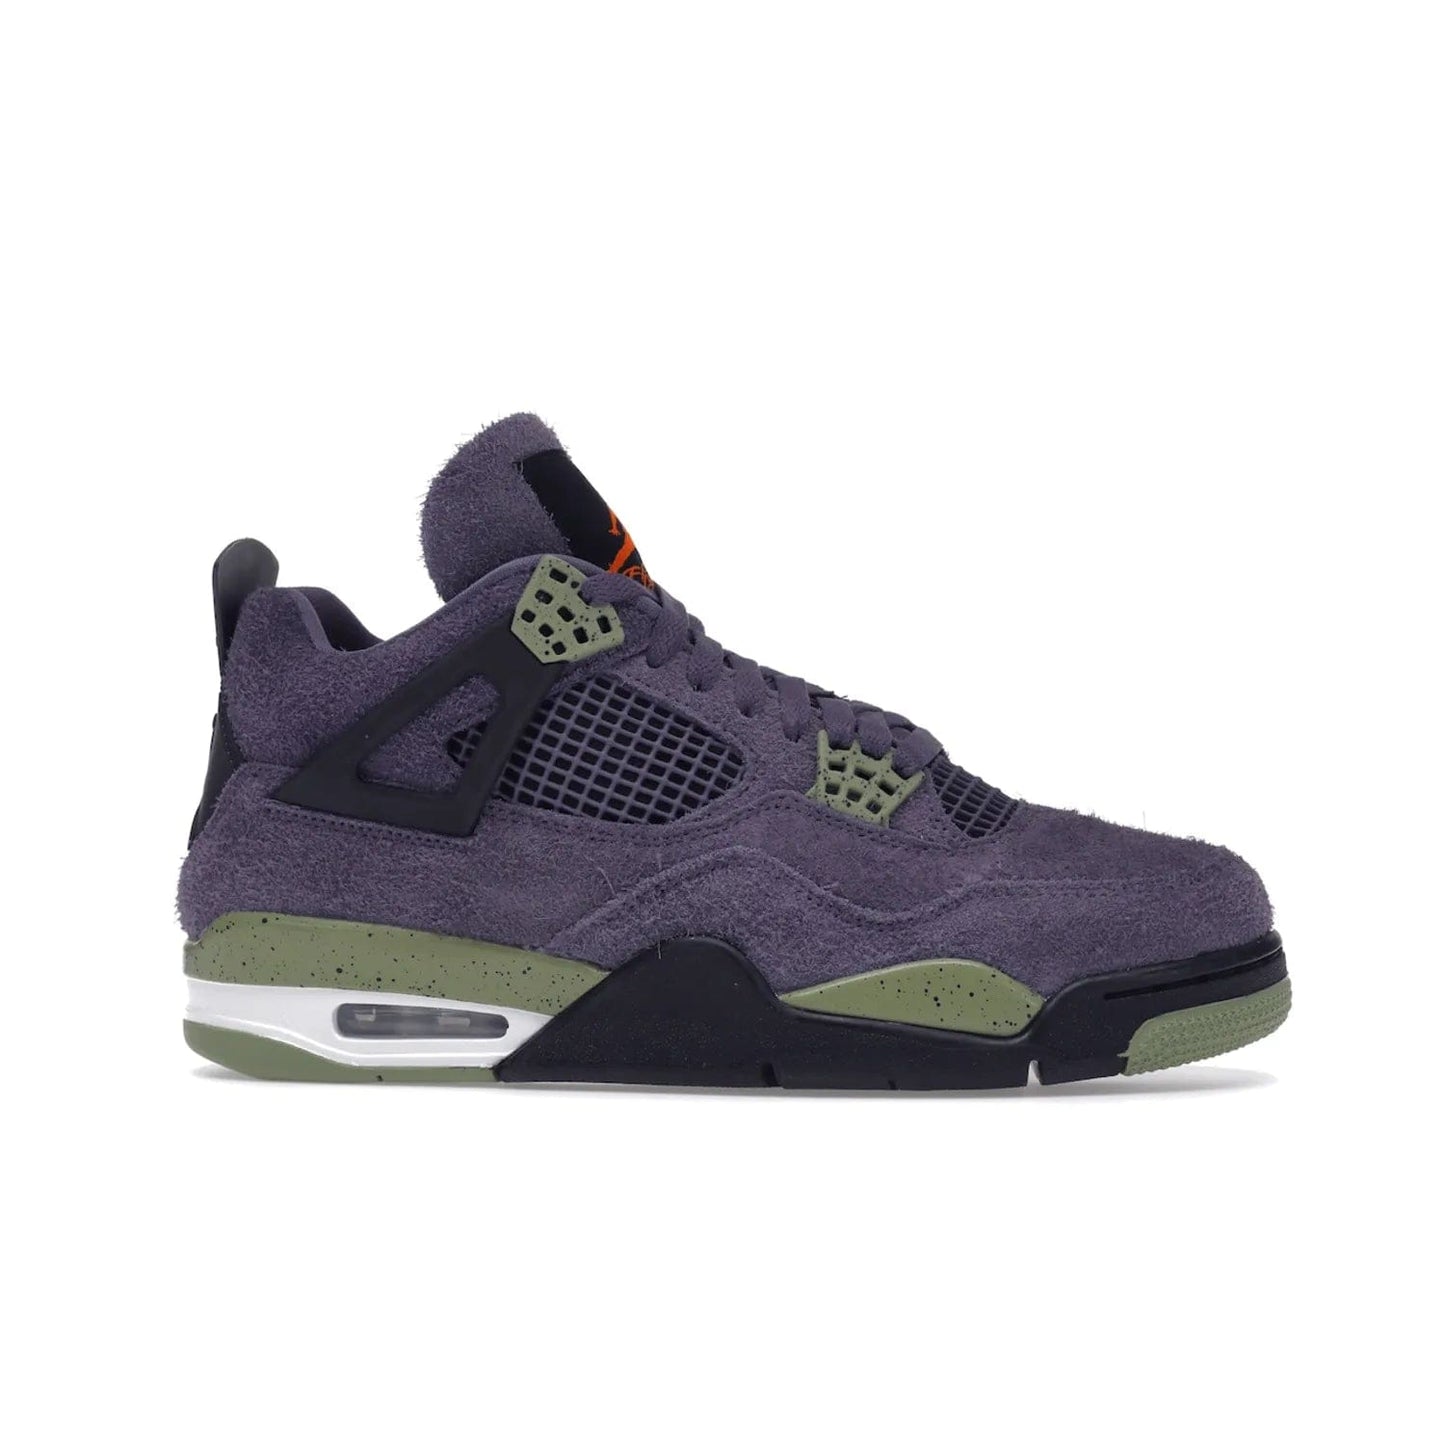 Jordan 4 Retro Canyon Purple (Women's) - Image 2 - Only at www.BallersClubKickz.com - New Air Jordan 4 Retro Canyon Purple W sneaker features shaggy purple suede, lime highlights & safety orange Jumpman branding. Classic ankle-hugging silhouette with modern colors released 15/10/2022.